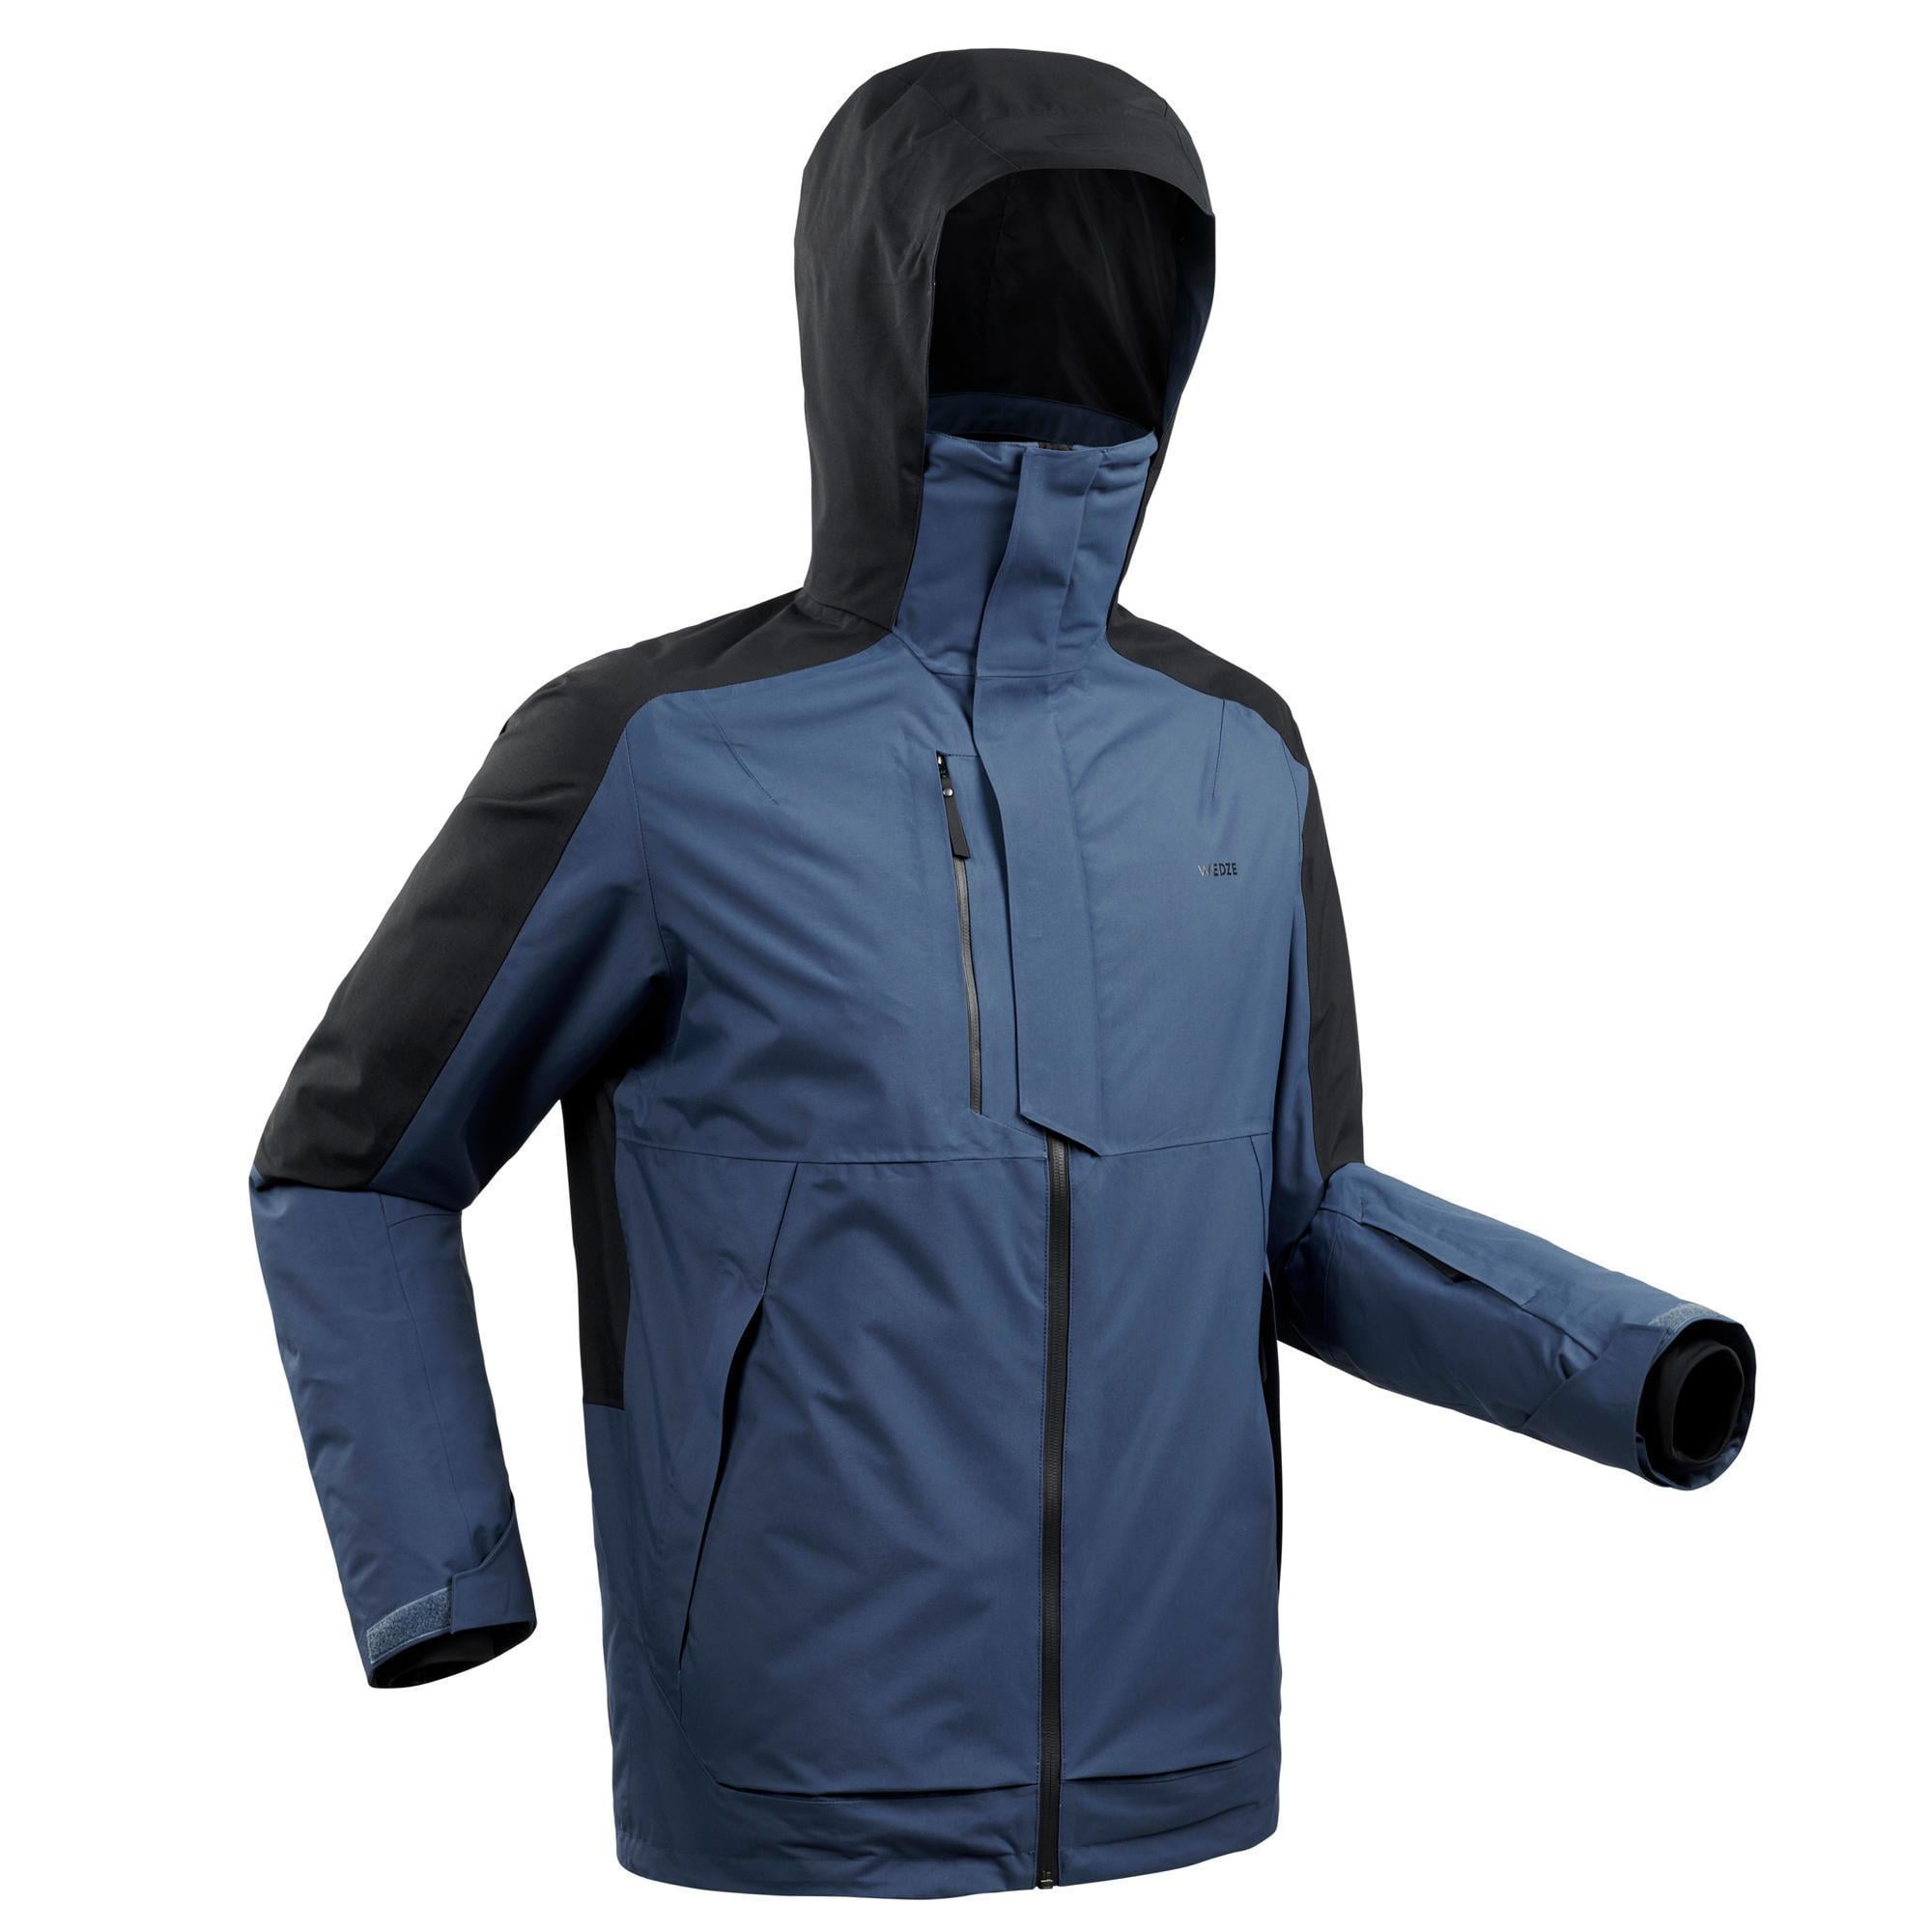 columbia men's north protection hooded jacket